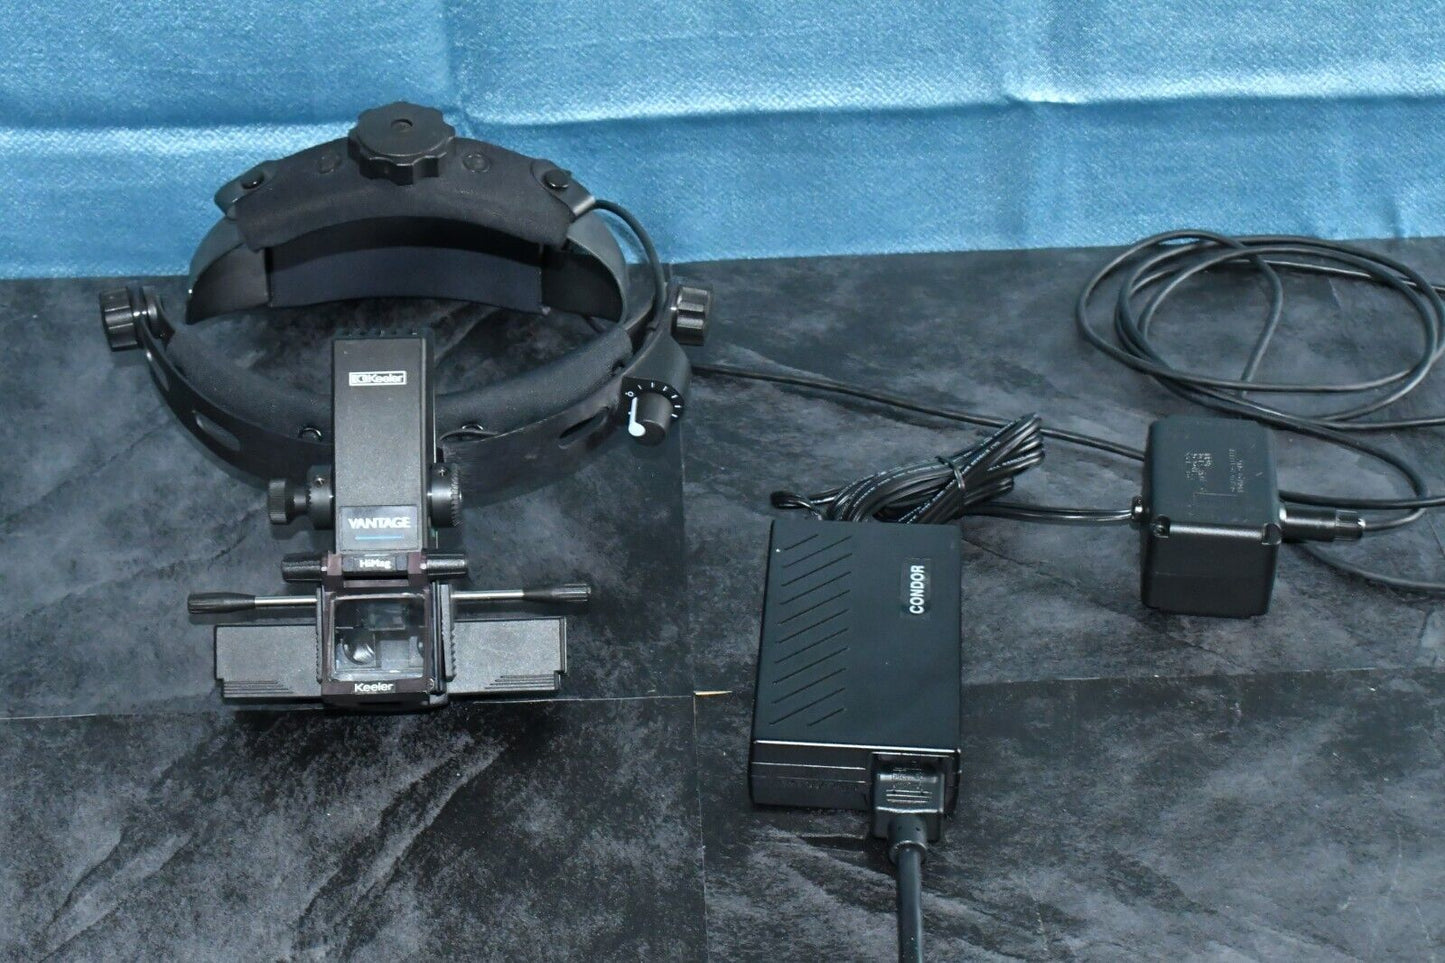 Keeler Vantage Binocular Indirect Ophthalmoscope with outlet power supply